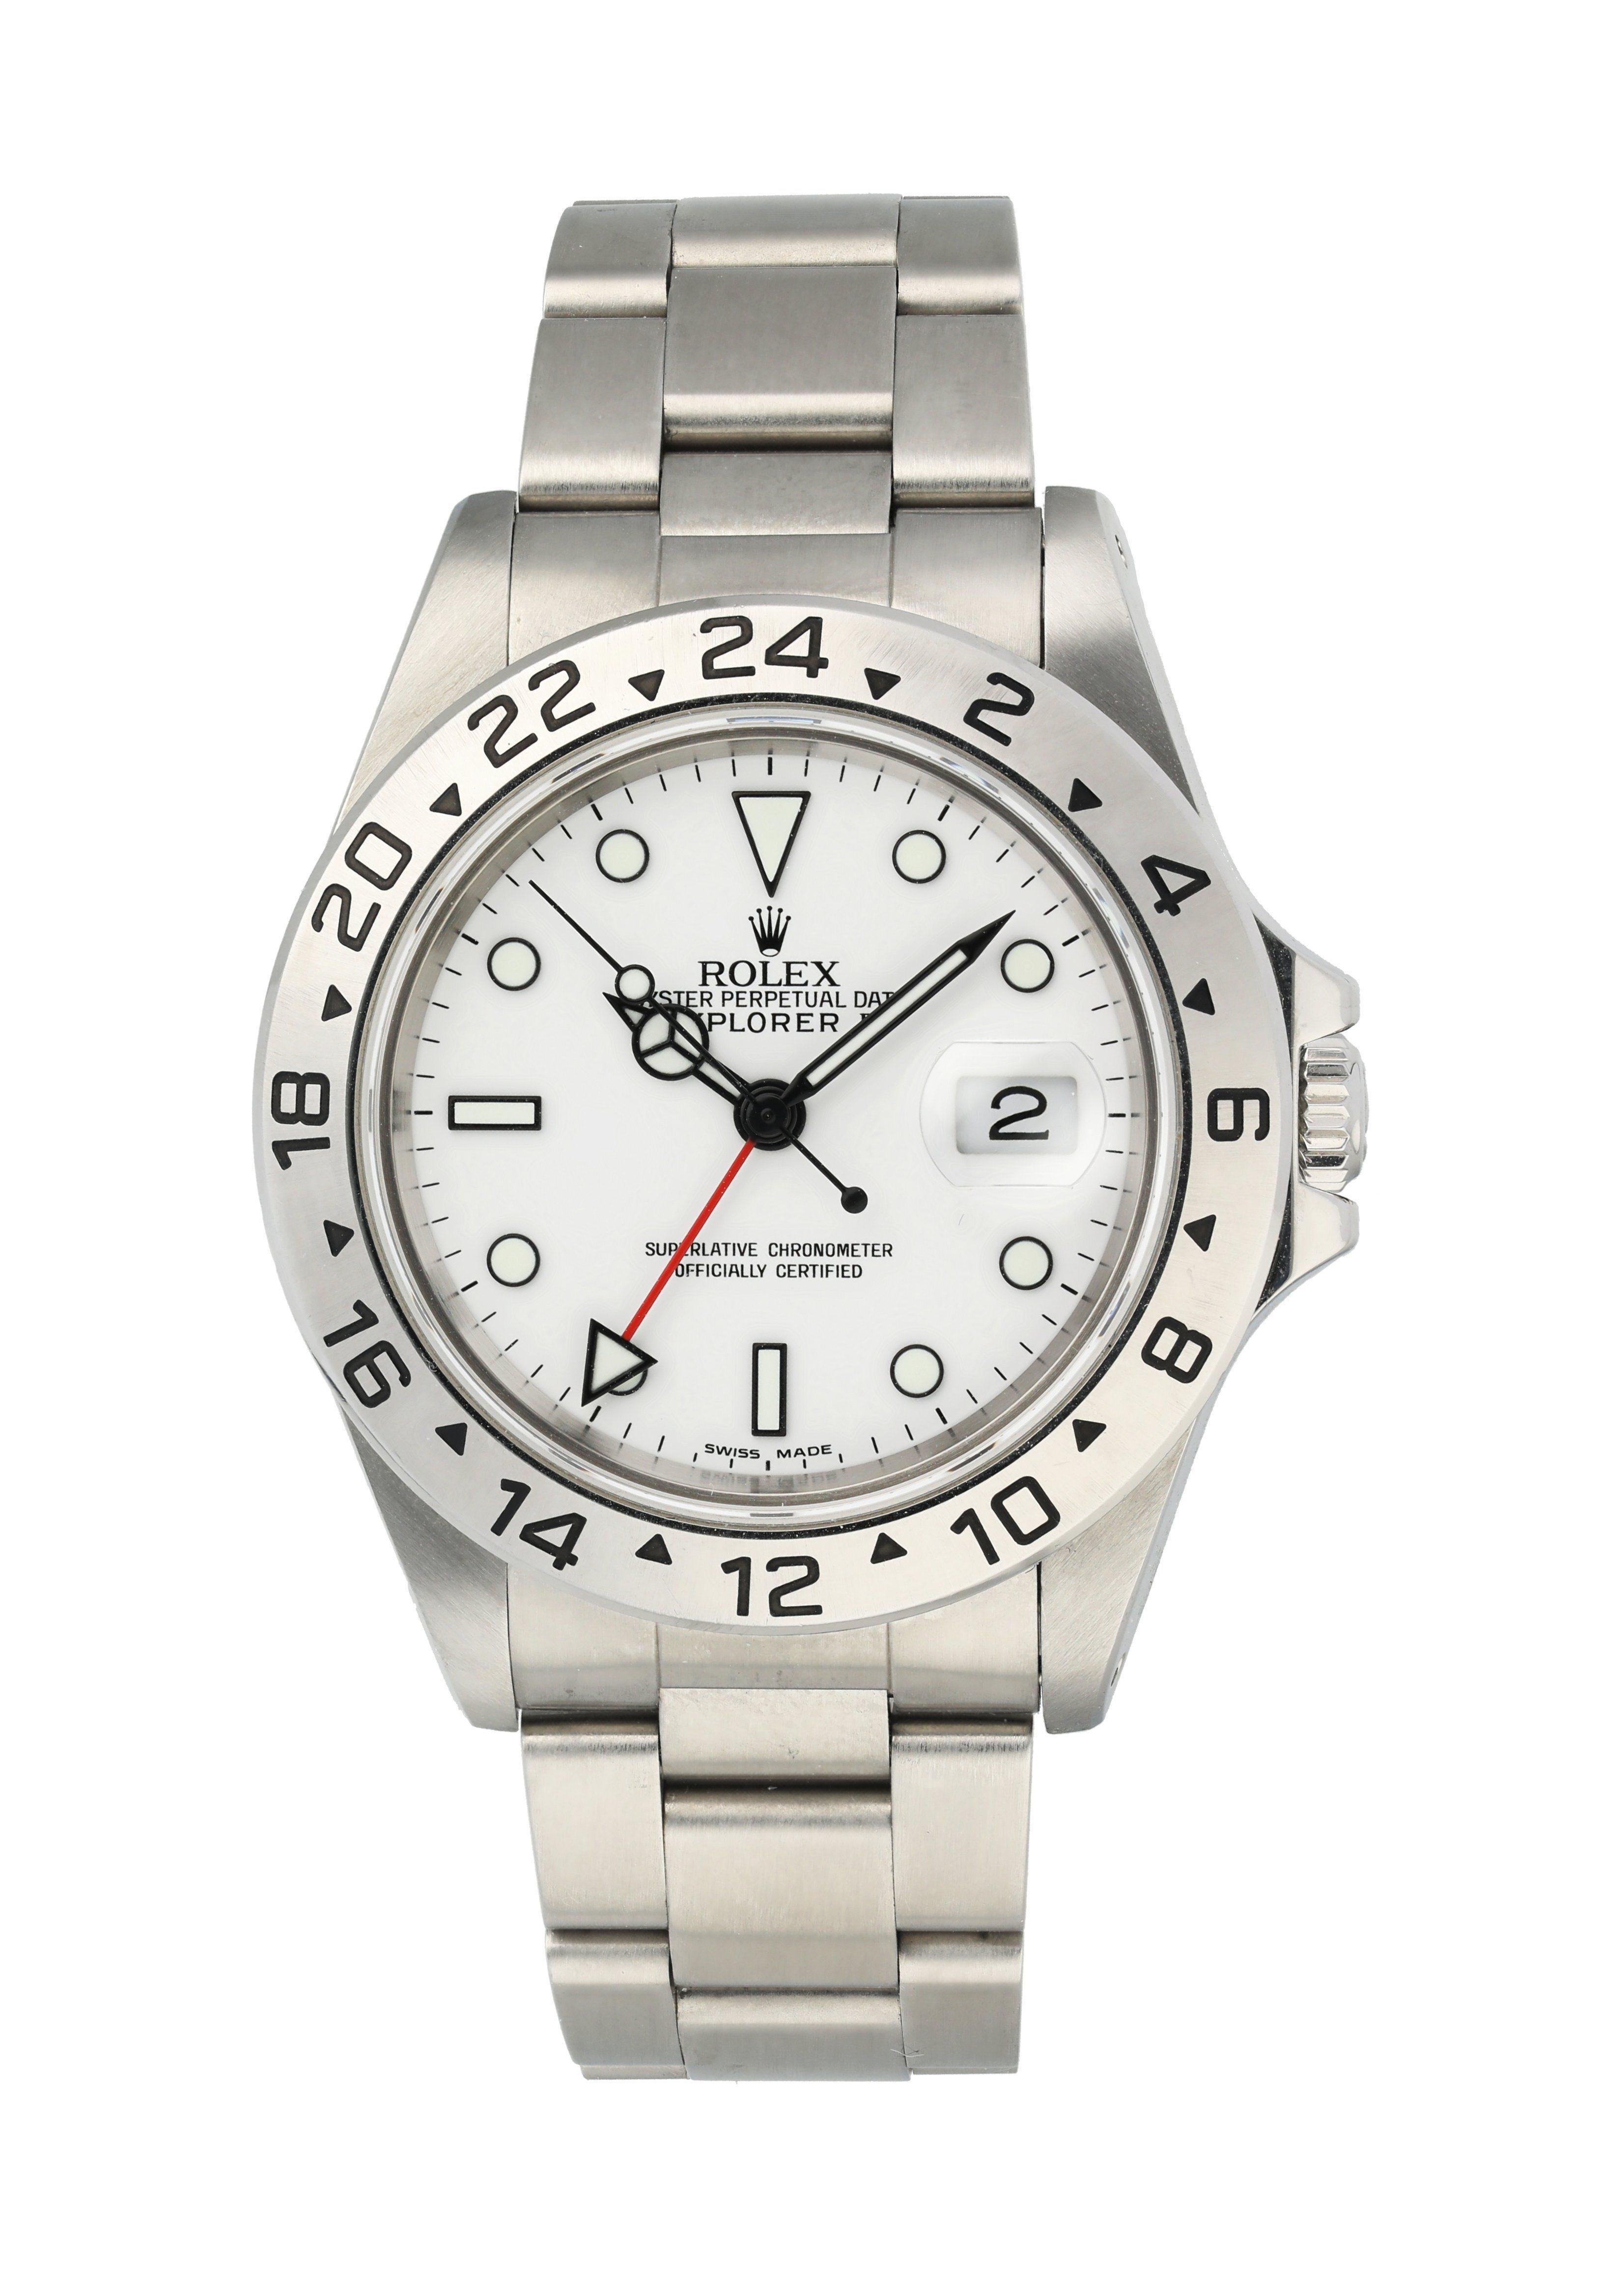 Rolex Explorer II 16570 Men's Watch.
40mm Stainless Steel case. 
Stainless Steel 24 Hour Time Display bezel. 
White dial with Luminous Steel hands and luminous dot hour markers. 
Minute markers on the outer dial. 
Date display at the 3 o'clock